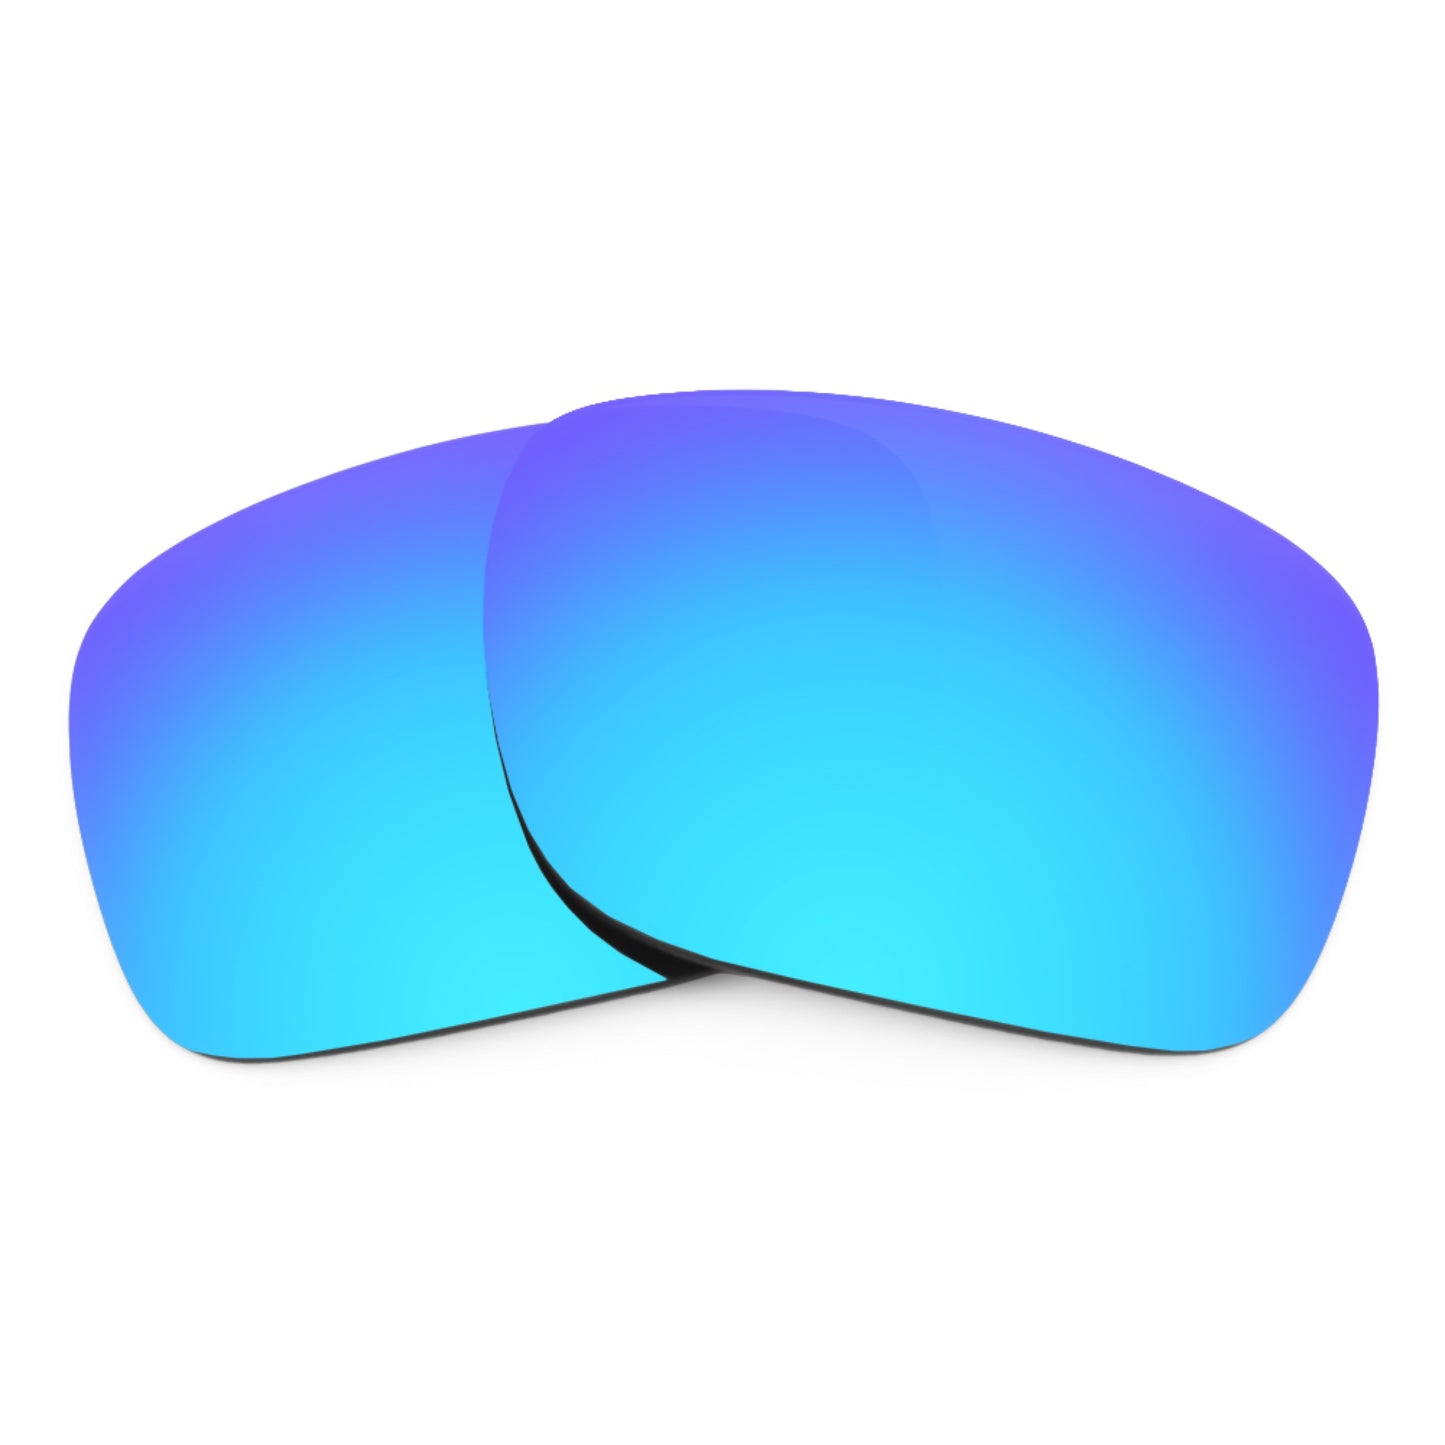 Revant replacement lenses for Ray-Ban New Caravan RB3636 55mm Non-Polarized Ice Blue